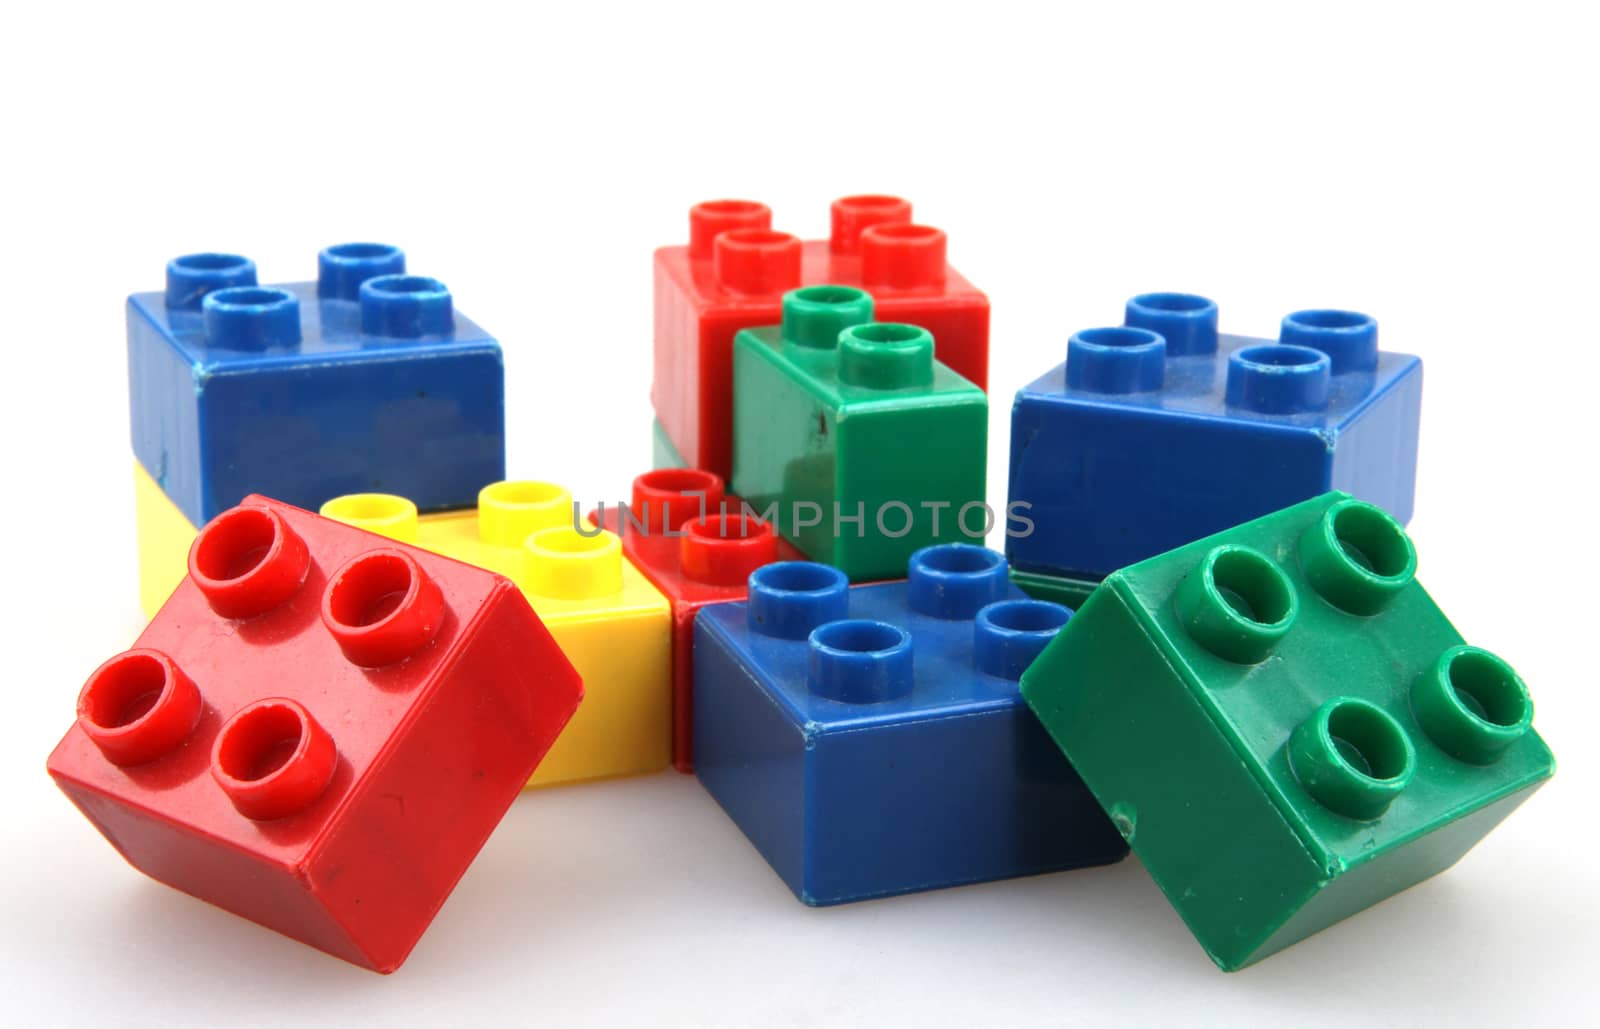 Building Blocks Isolated On White by nenov